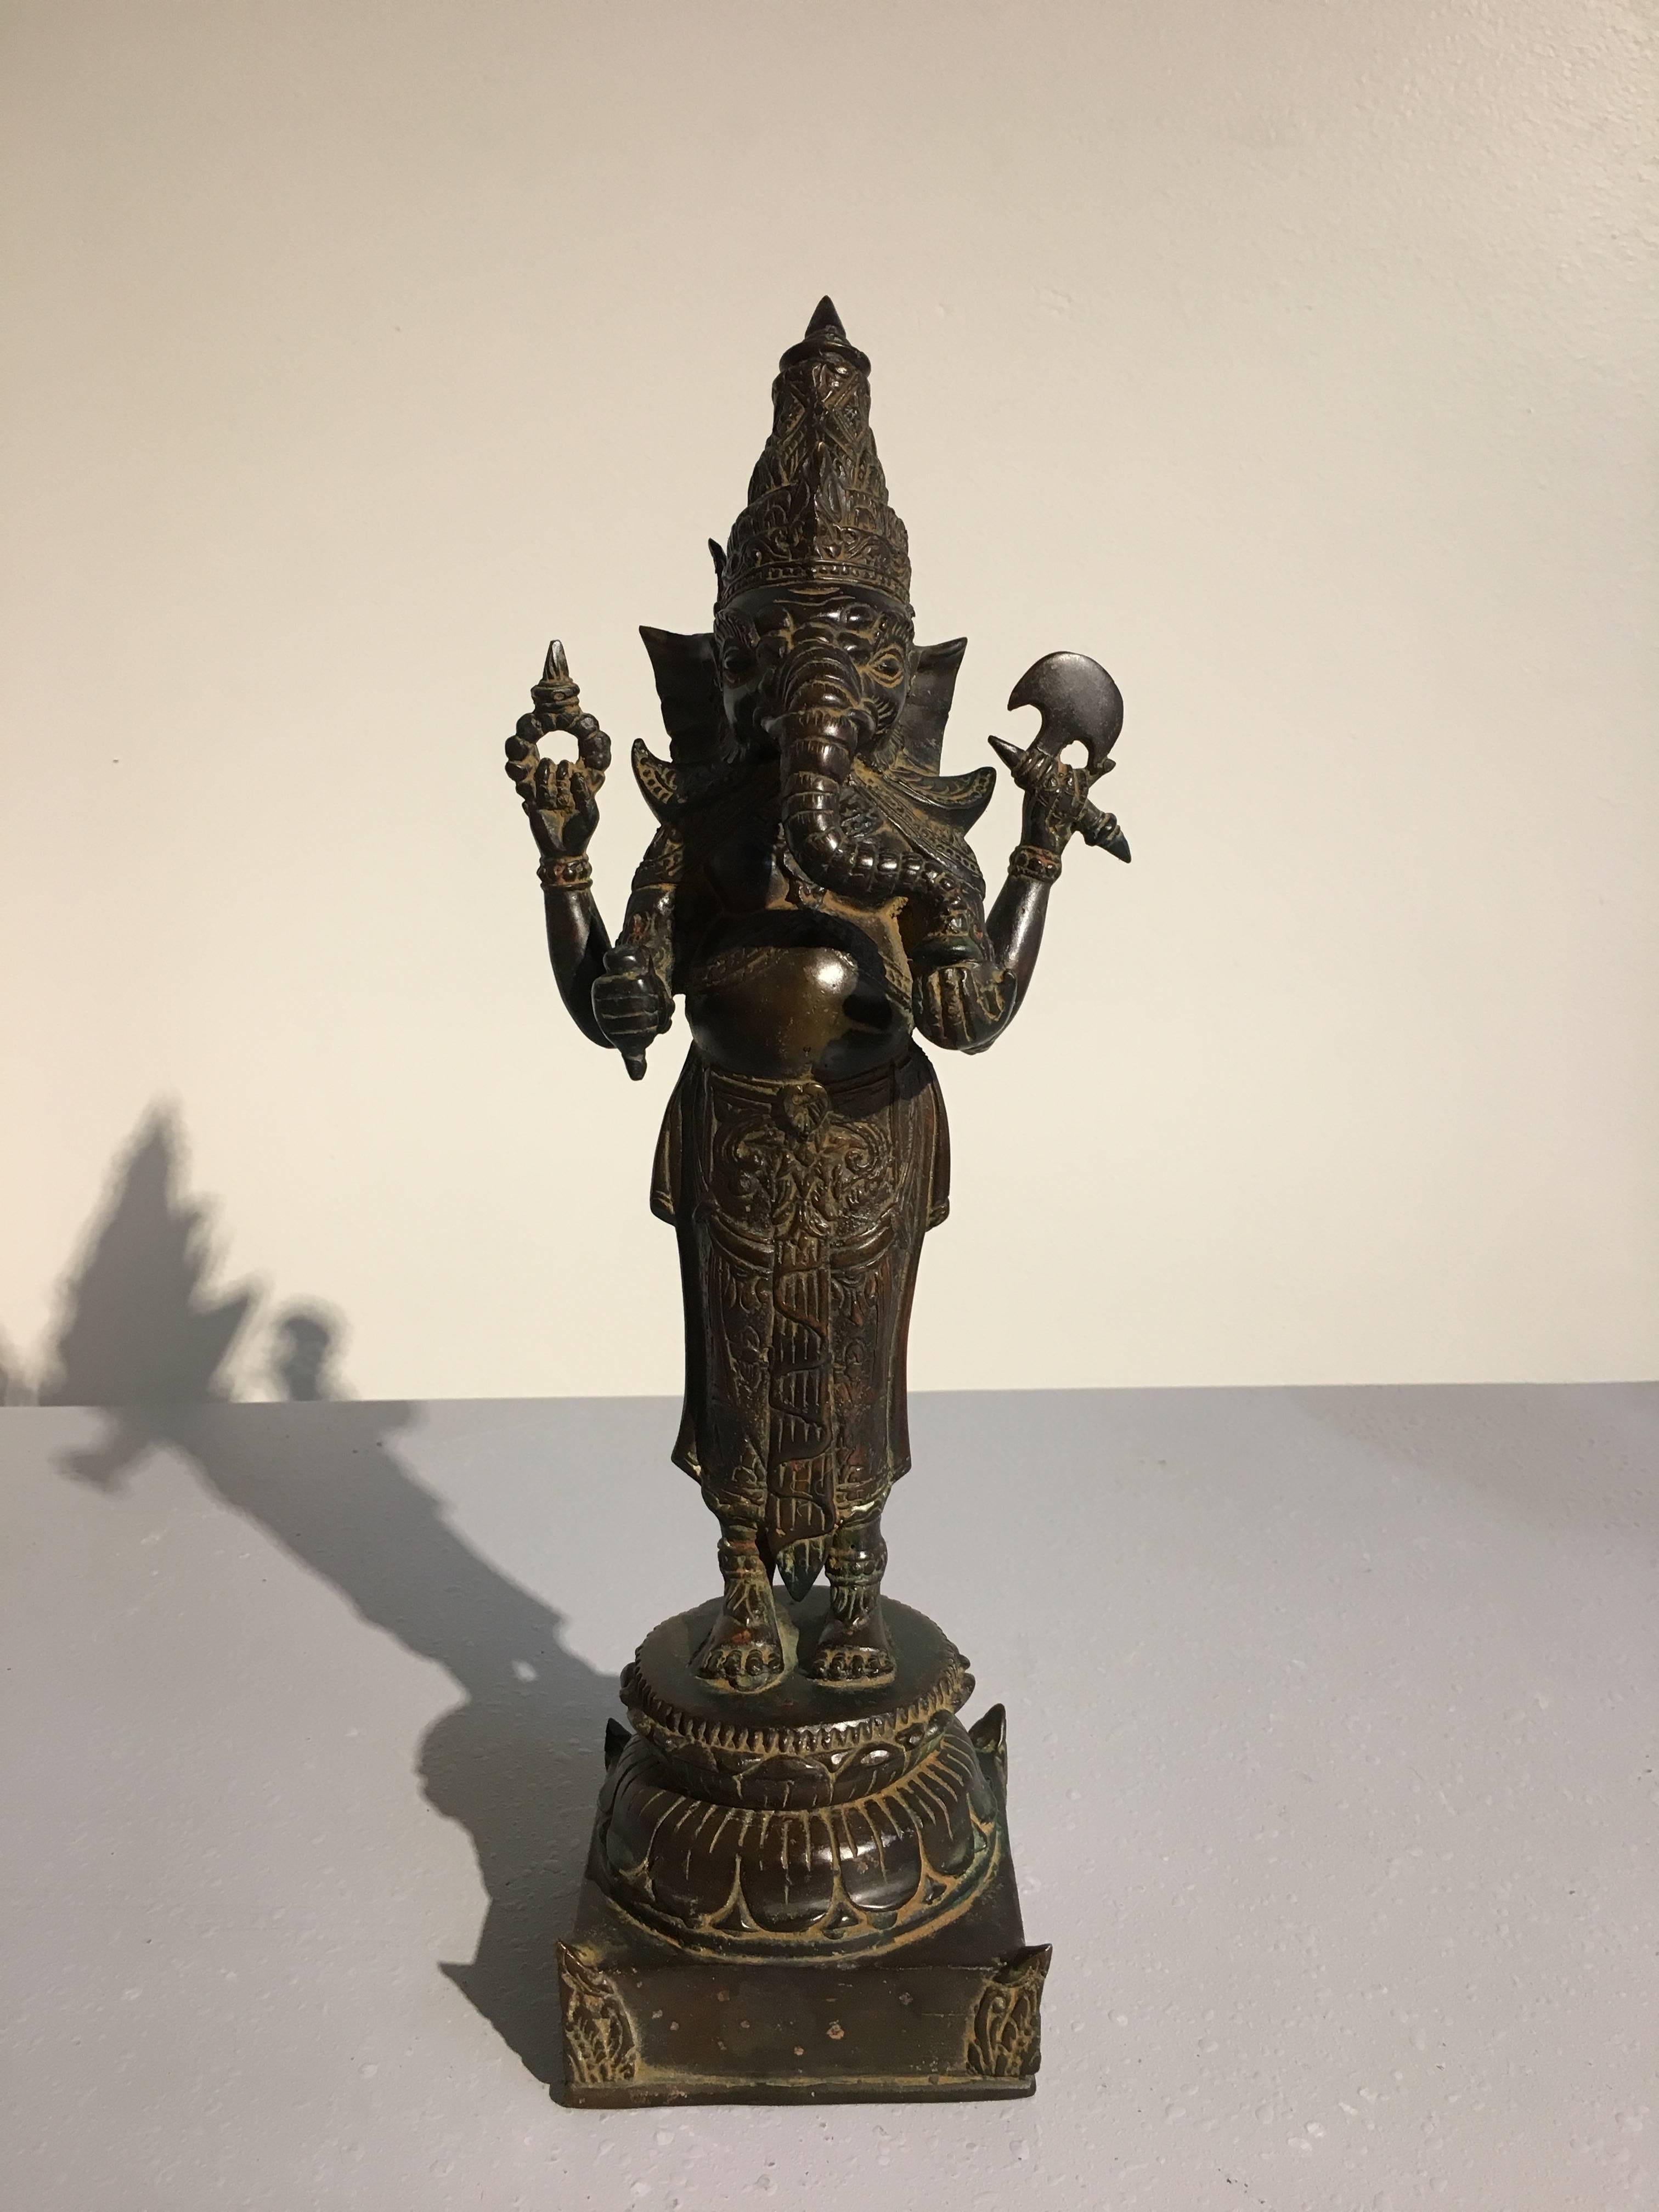 An unusual Khmer style cast bronze image of Ganesh, mid 20th century, Thailand. 

Ganesh, or Ganesha, the beloved elephant headed Hindu god, considered the Remover of Obstacles, is portrayed standing bare chested upon a double lotus pedestal. His